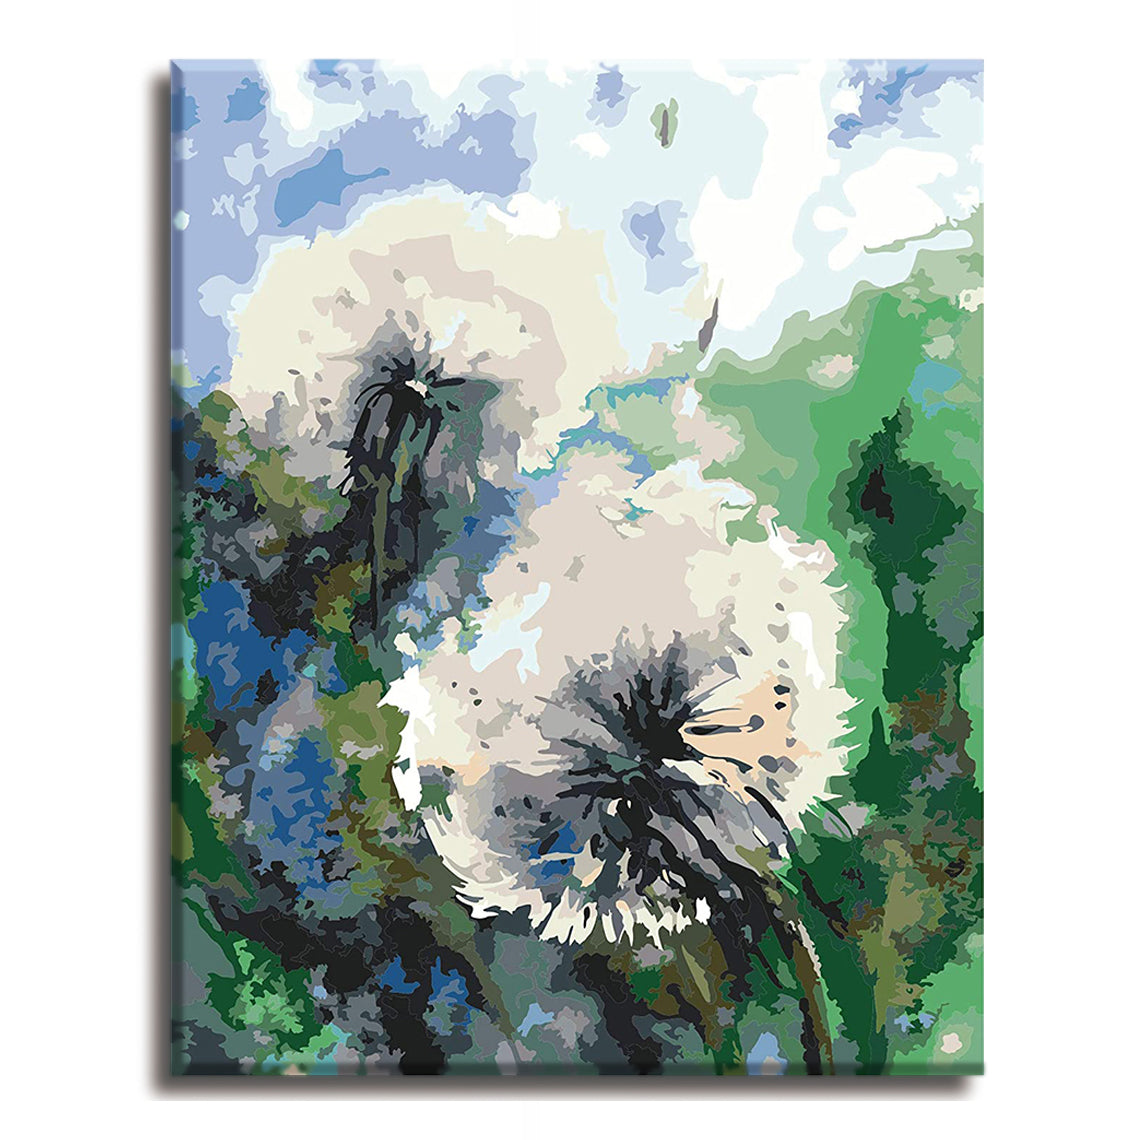 Paint by Numbers Kit Abstract Flowers